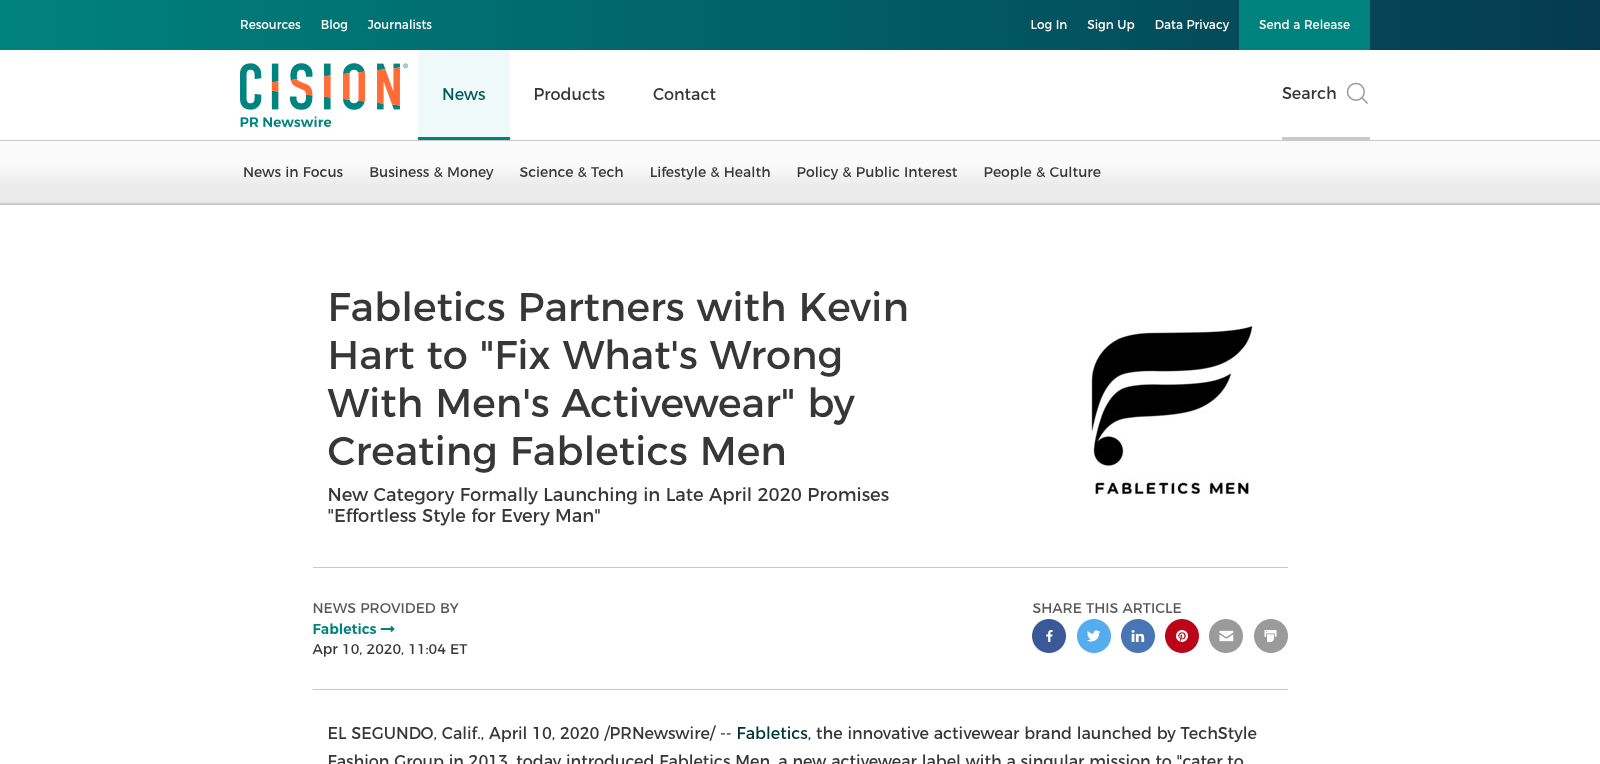 Fabletics Partner with Kevin Hart